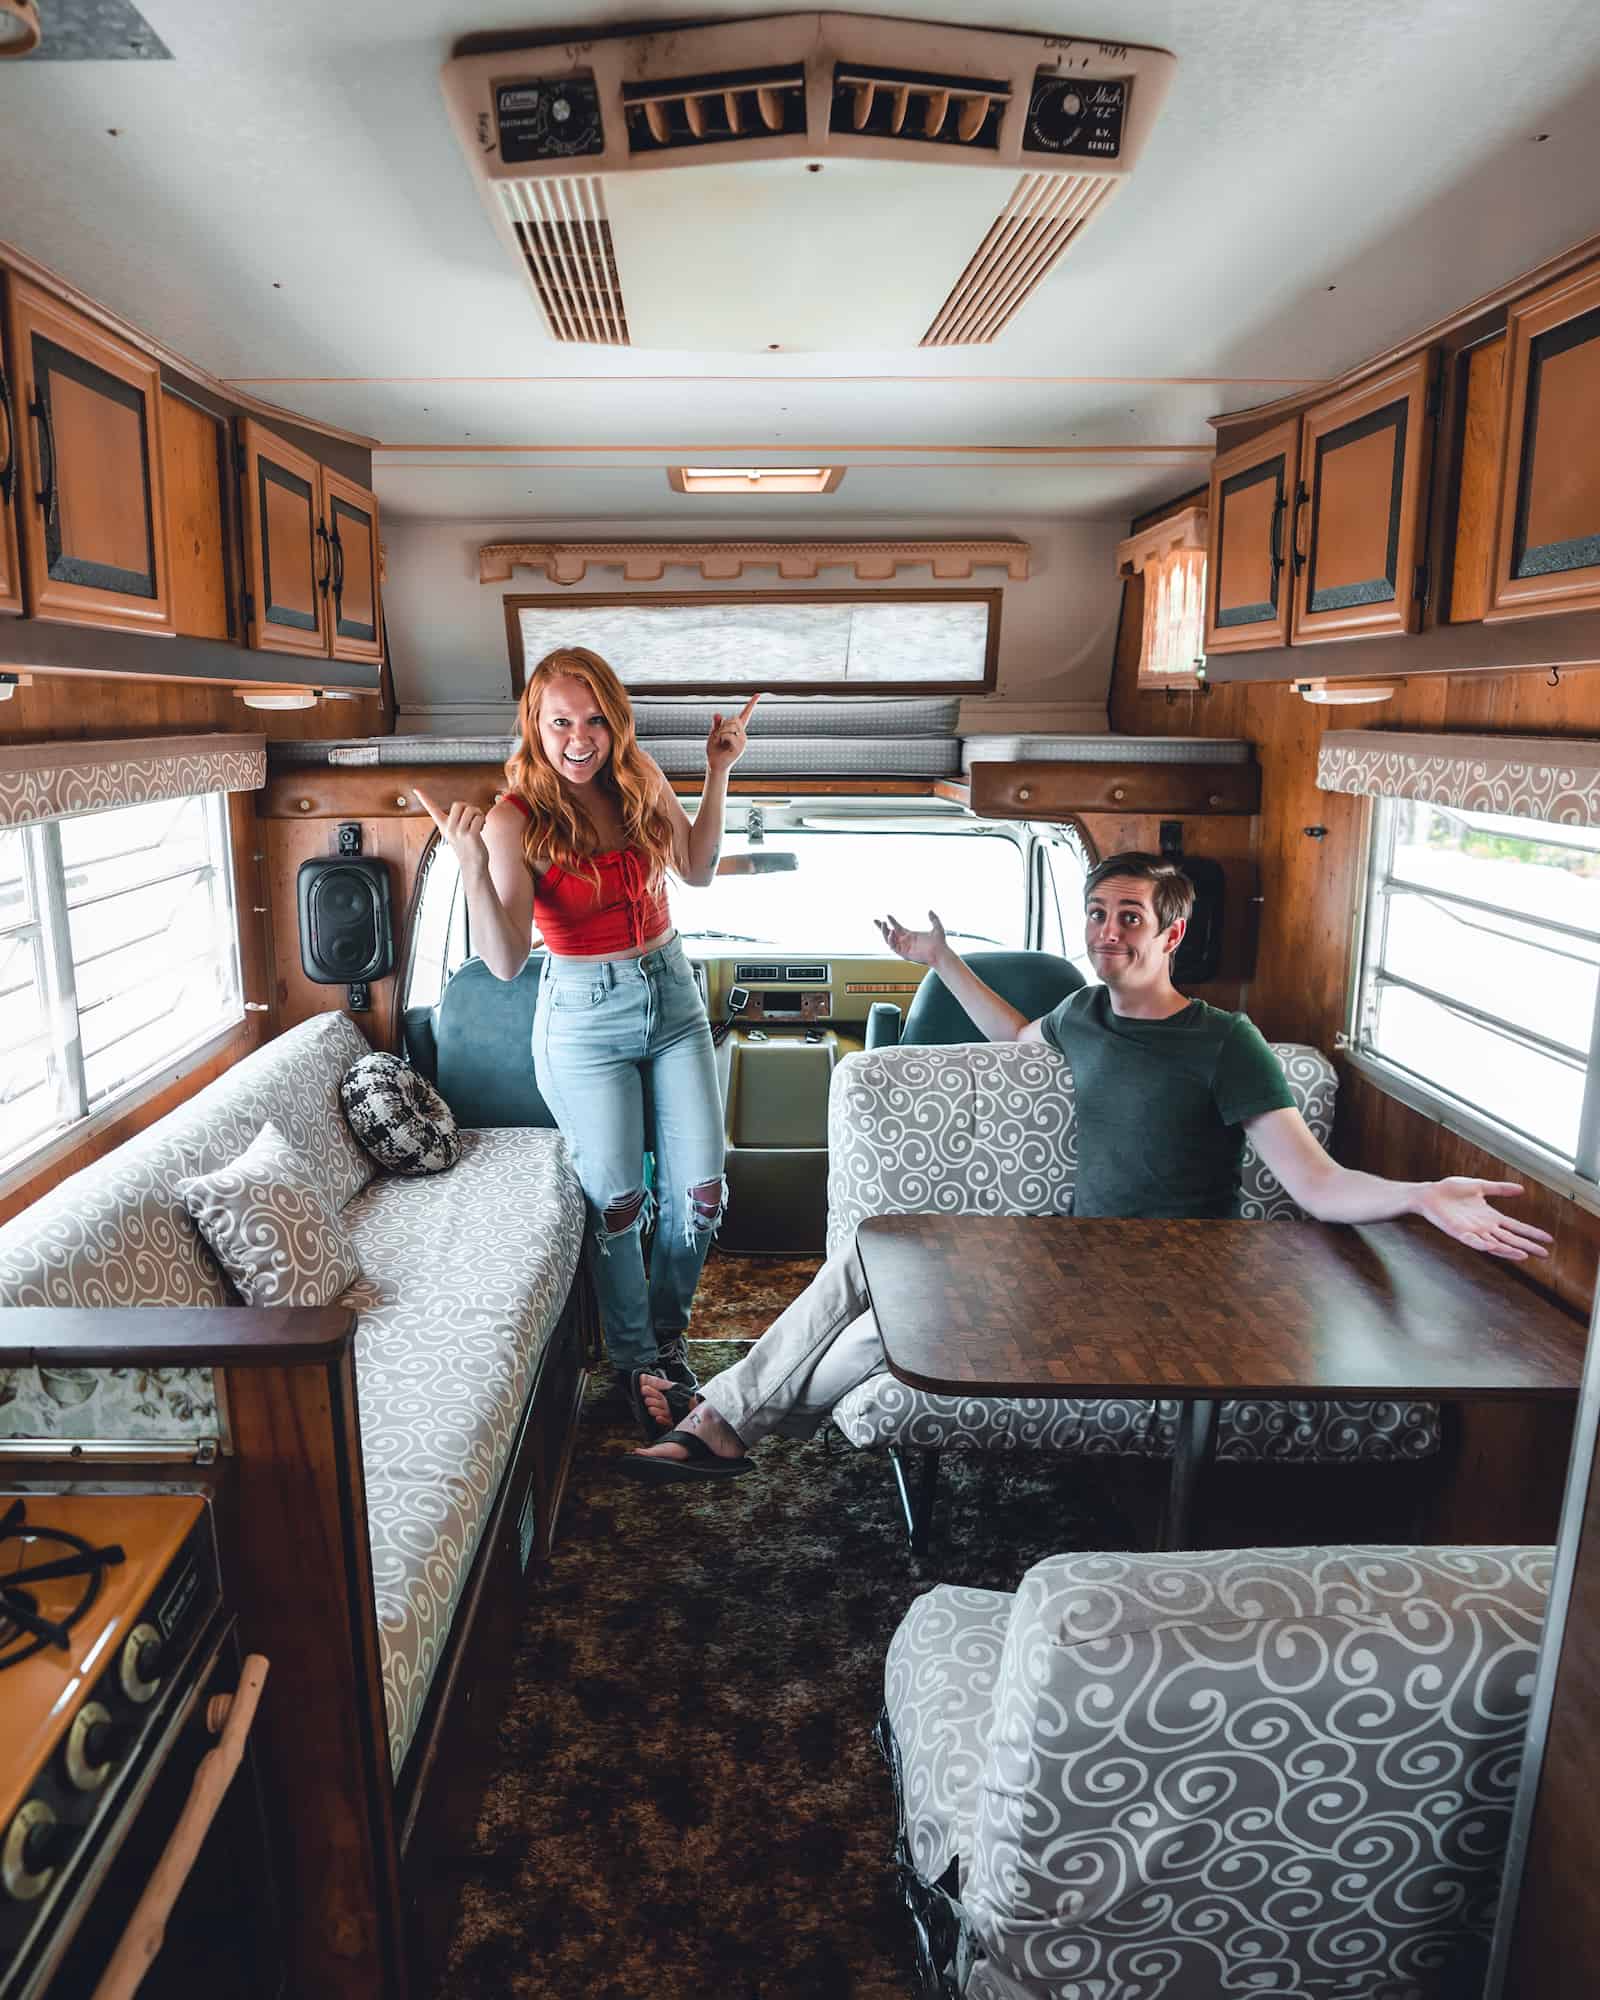 Interior of The Endless Adventure's Class C RV with the couple inside